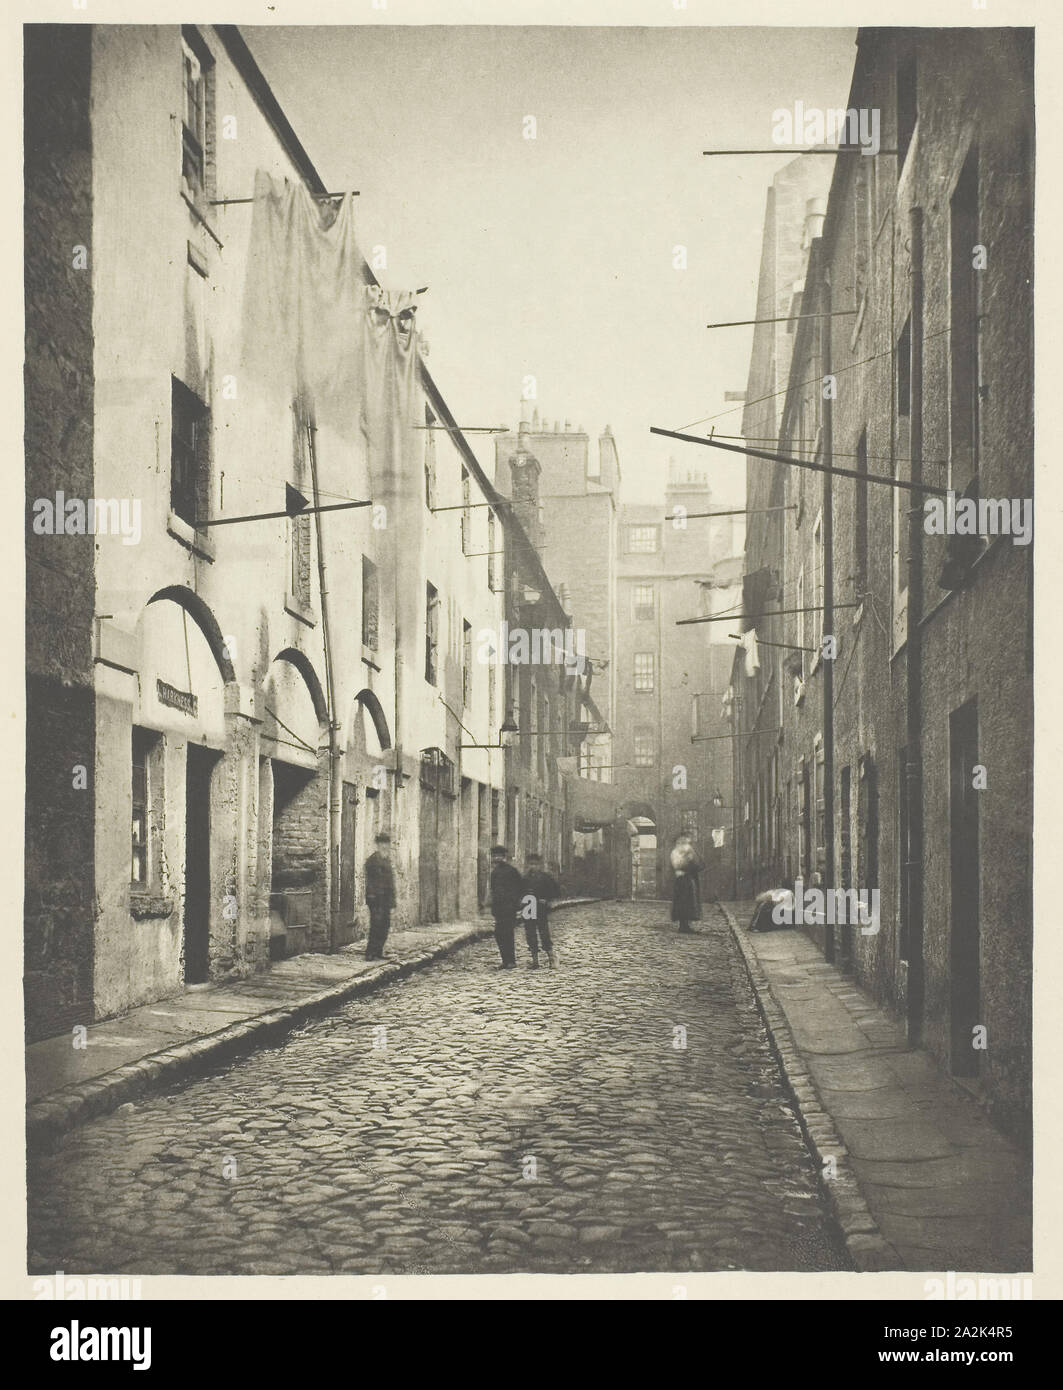 Broad Close No. 167 High Street, 1868, Thomas Annan, Scottish, 1829–1887, Scotland, Photogravure, plate 3 from the book 'The Old Closes & Streets of Glasgow' (1900), 22.2 x 17.9 cm (image), 38 x 27.2 cm (paper Stock Photo